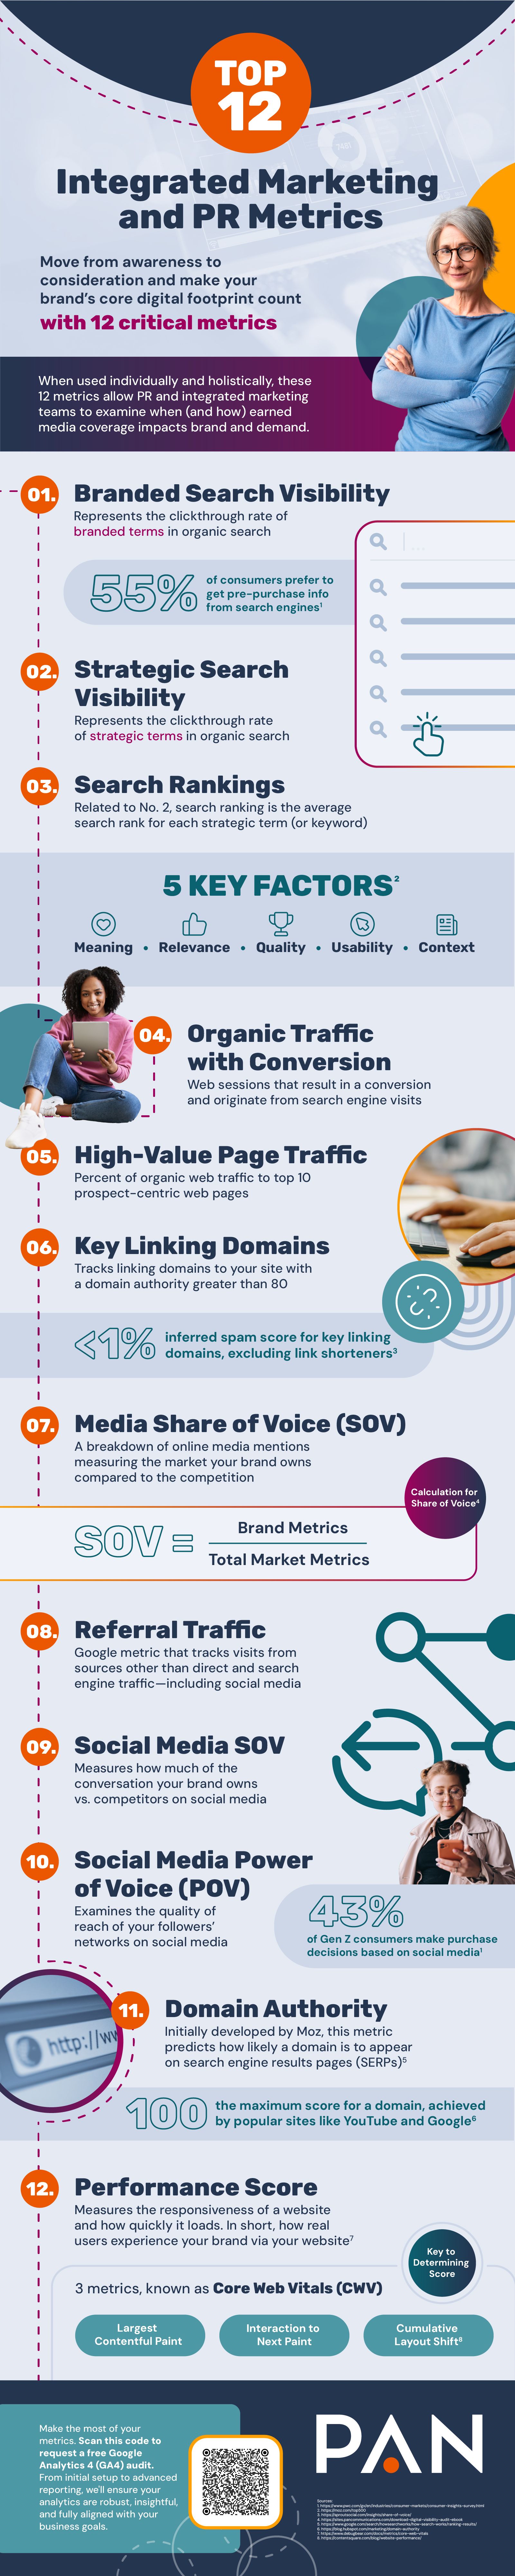 An infographic detailing the top 12 integrated marketing and PR metrics to monitor to make the most out of measurement